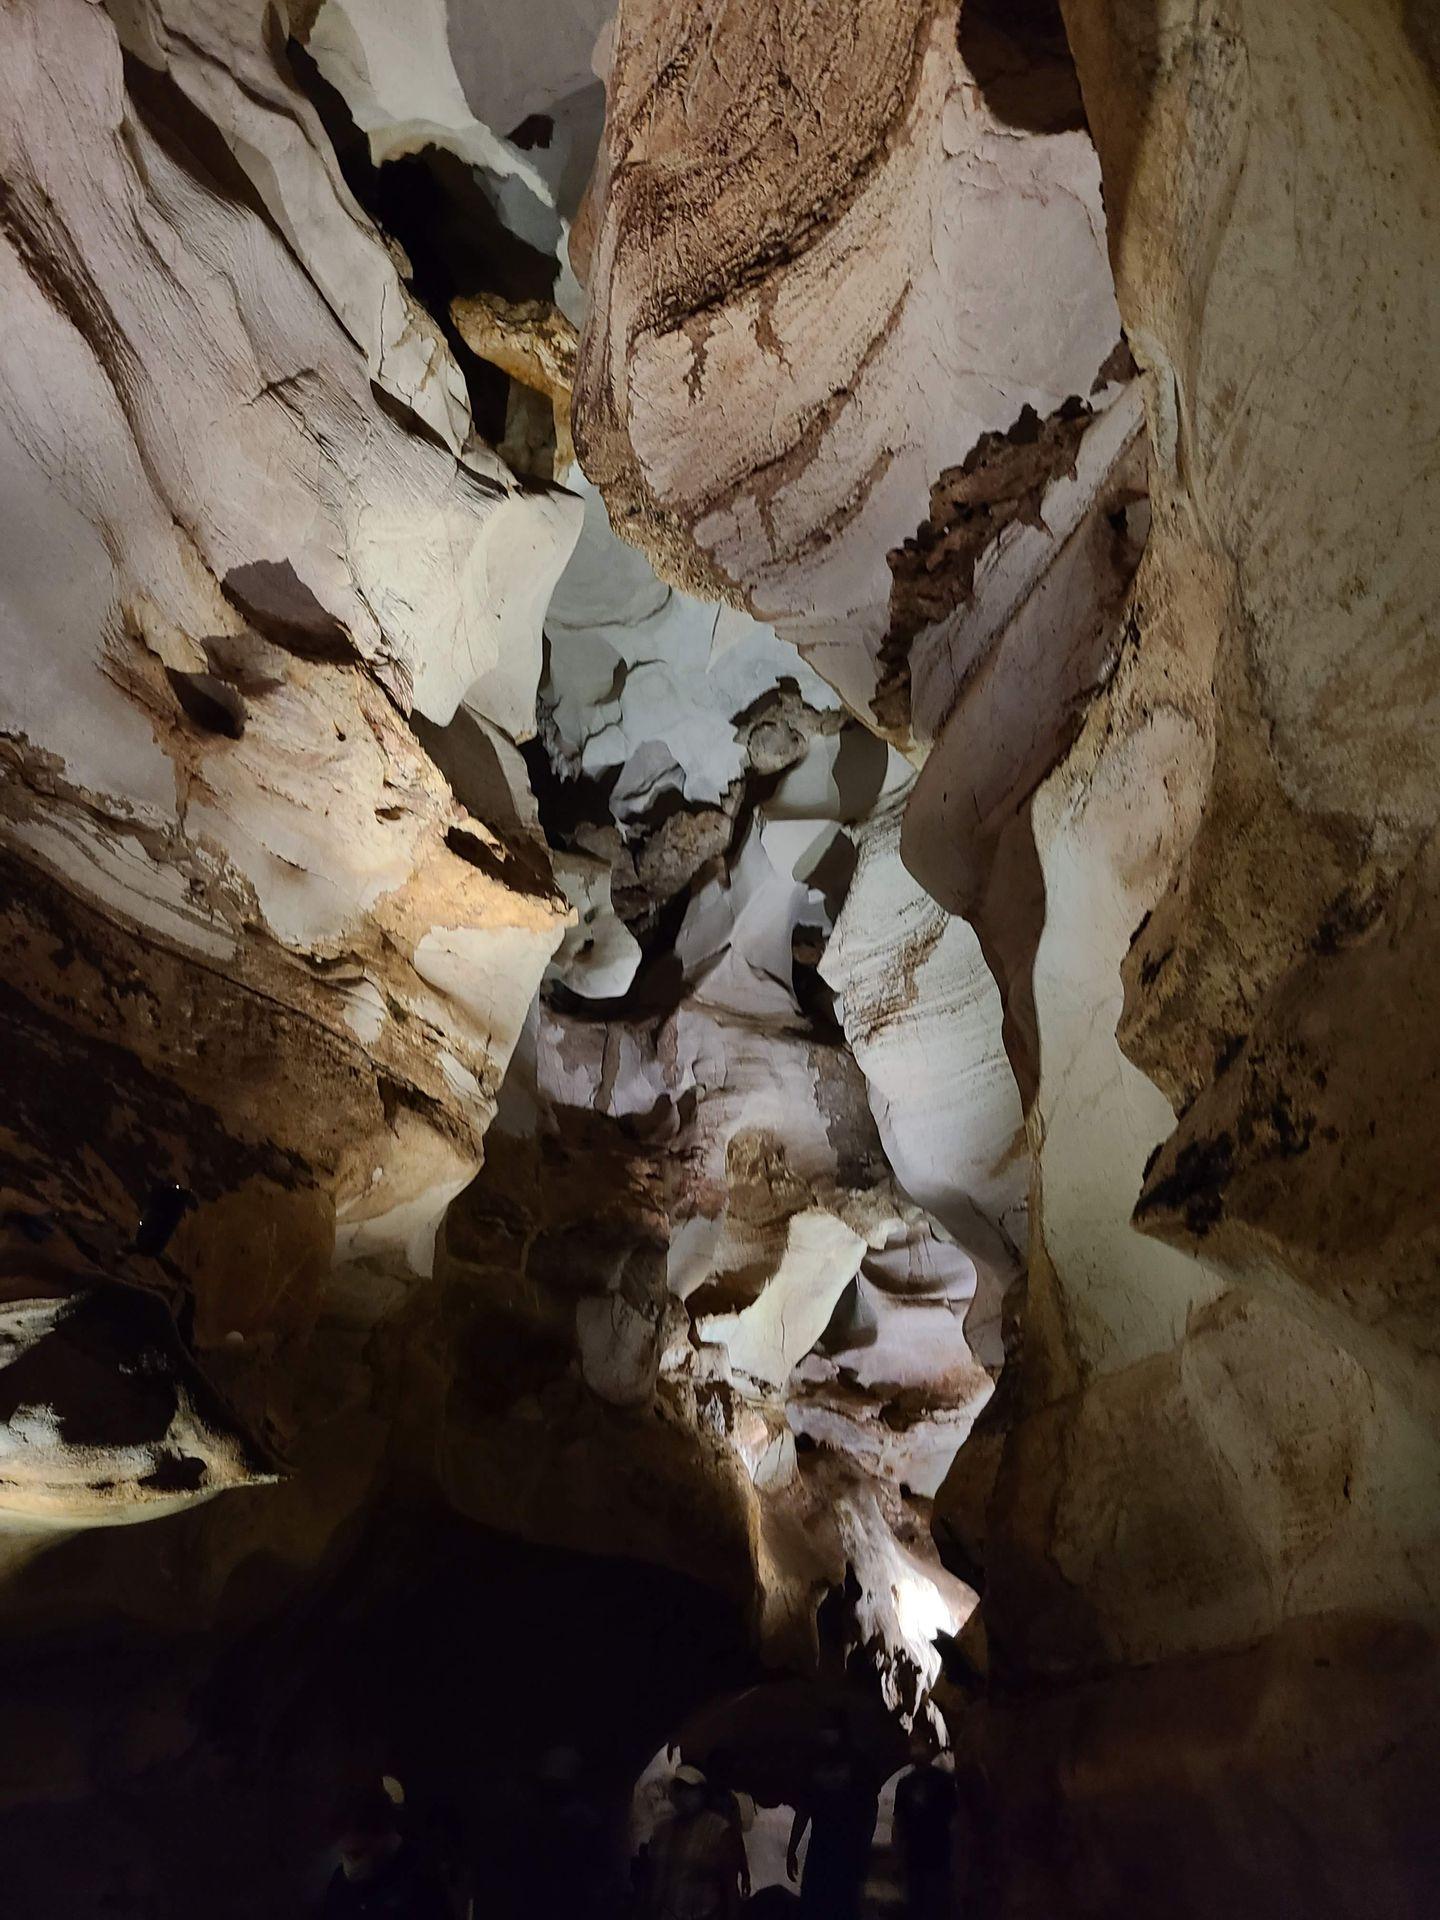 A view looking up at the walls inside of Longhorn Caverns.